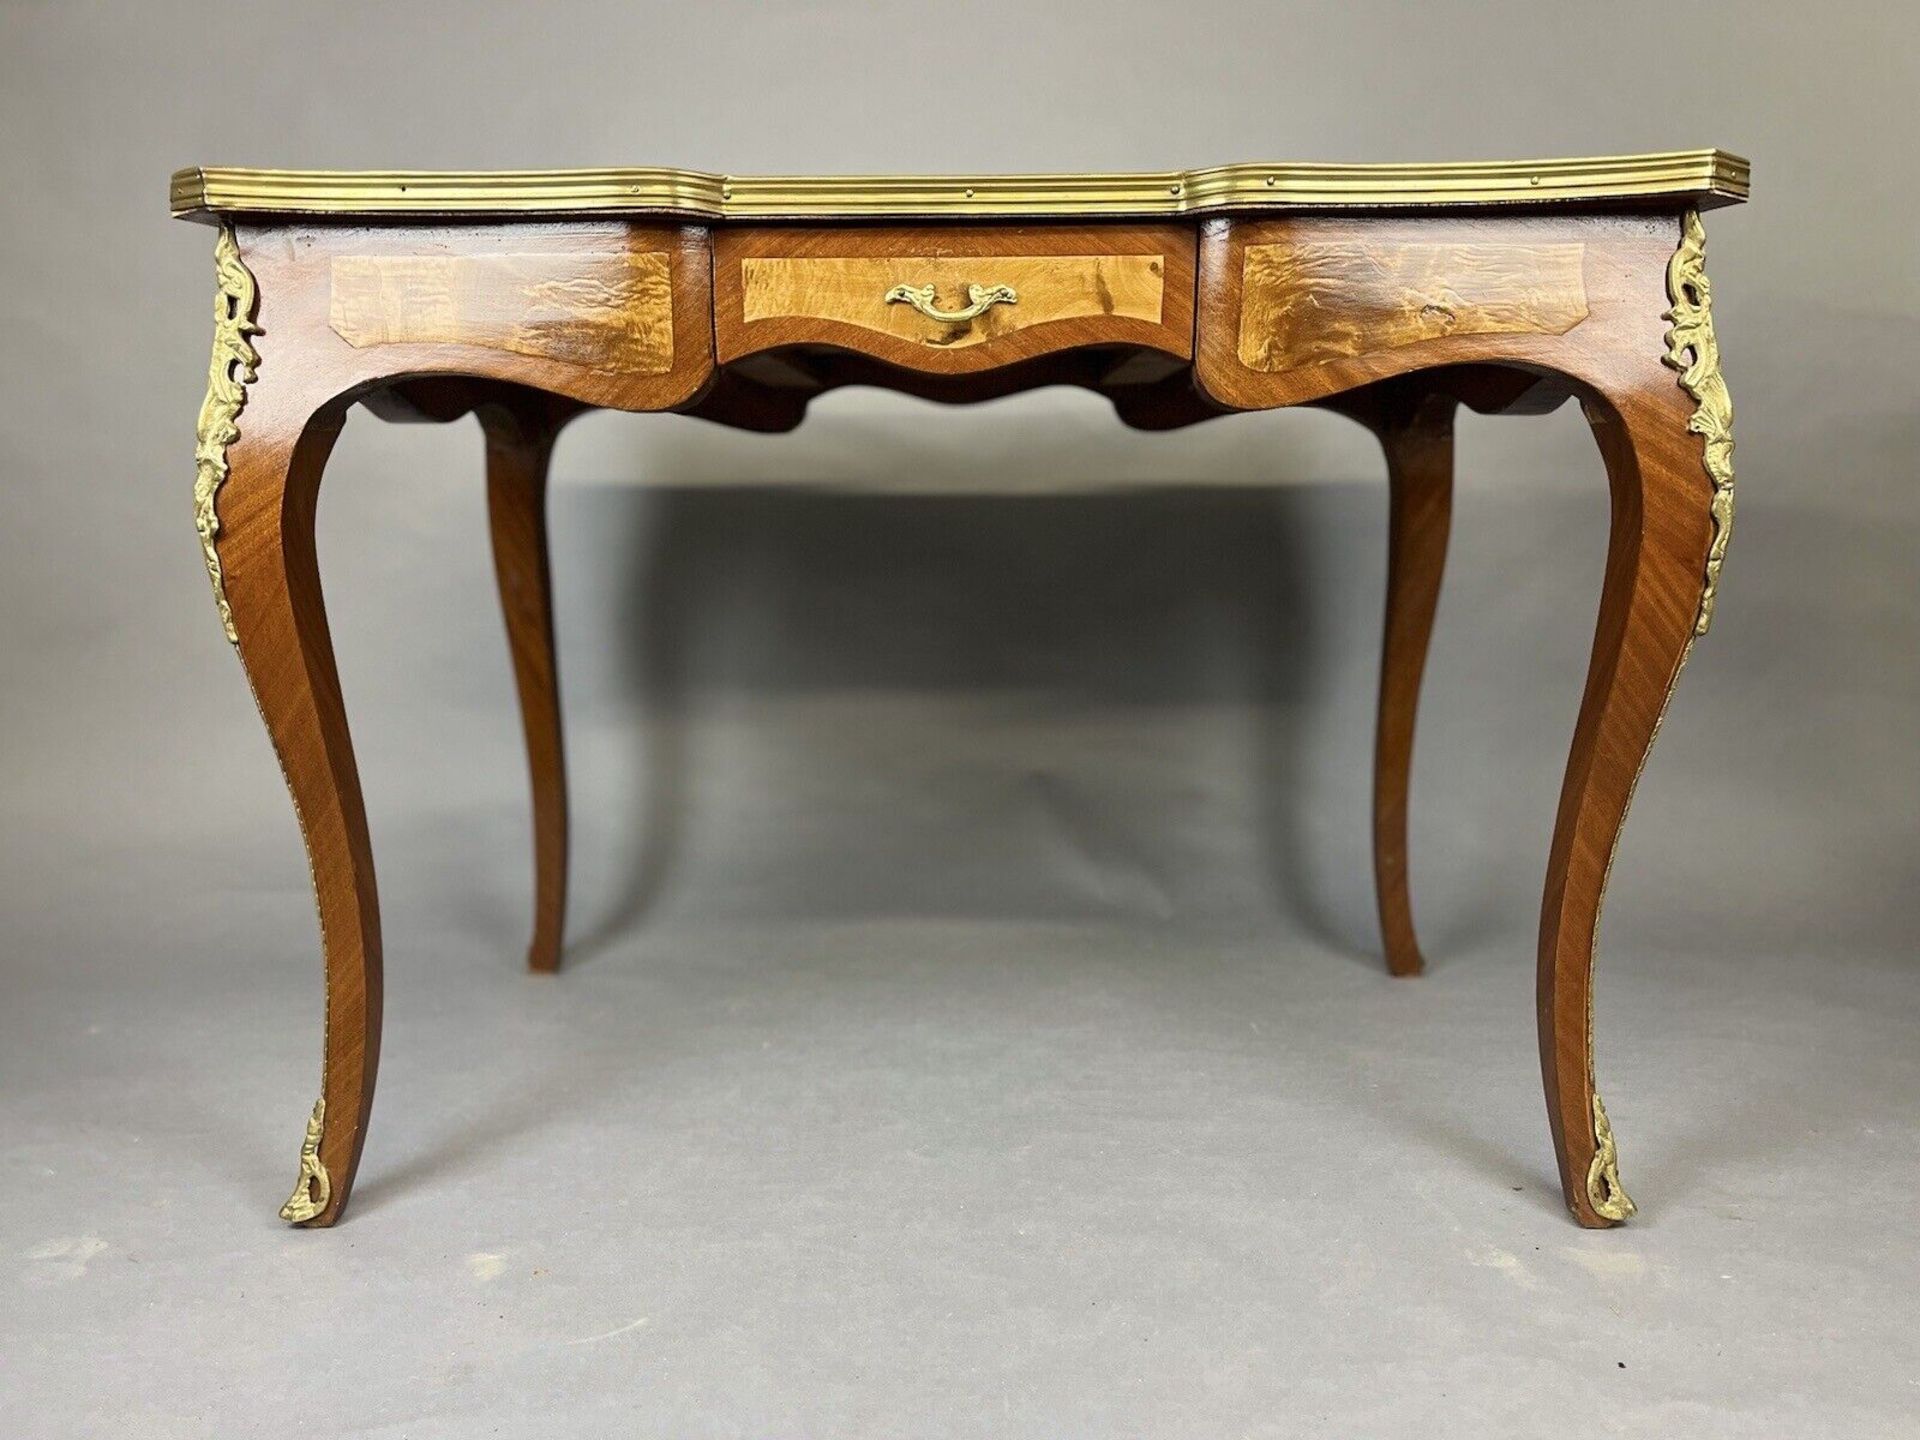 French Louis XV Style Kingwood Leather Inlay Bureau Plat Desk With Gilt Bronze Ormolu The Shaped Top - Image 2 of 7